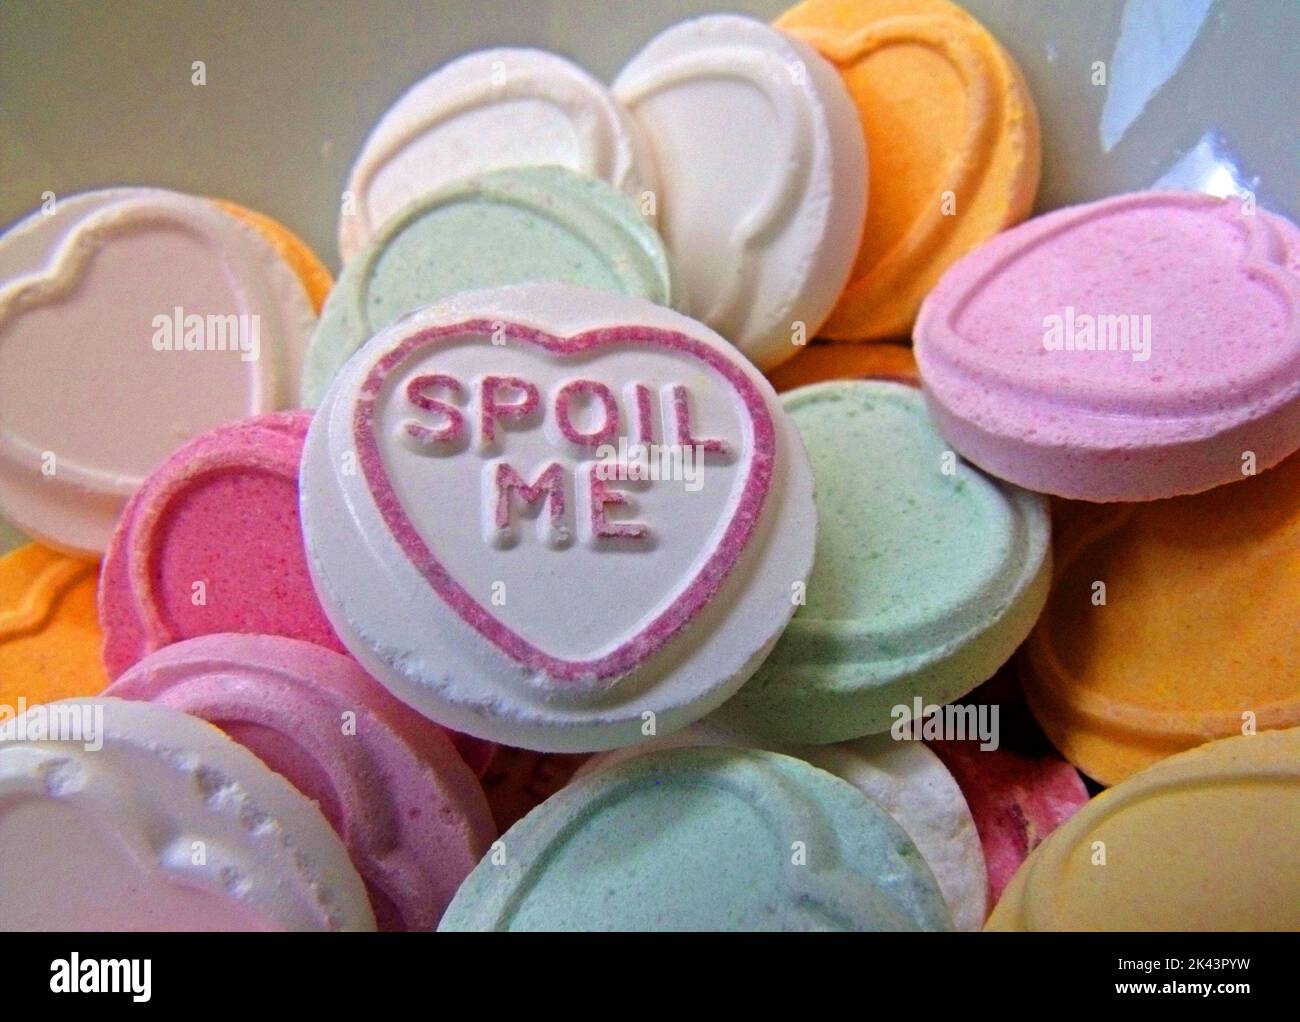 Love Hearts sweets, Spoil Me Stock Photo